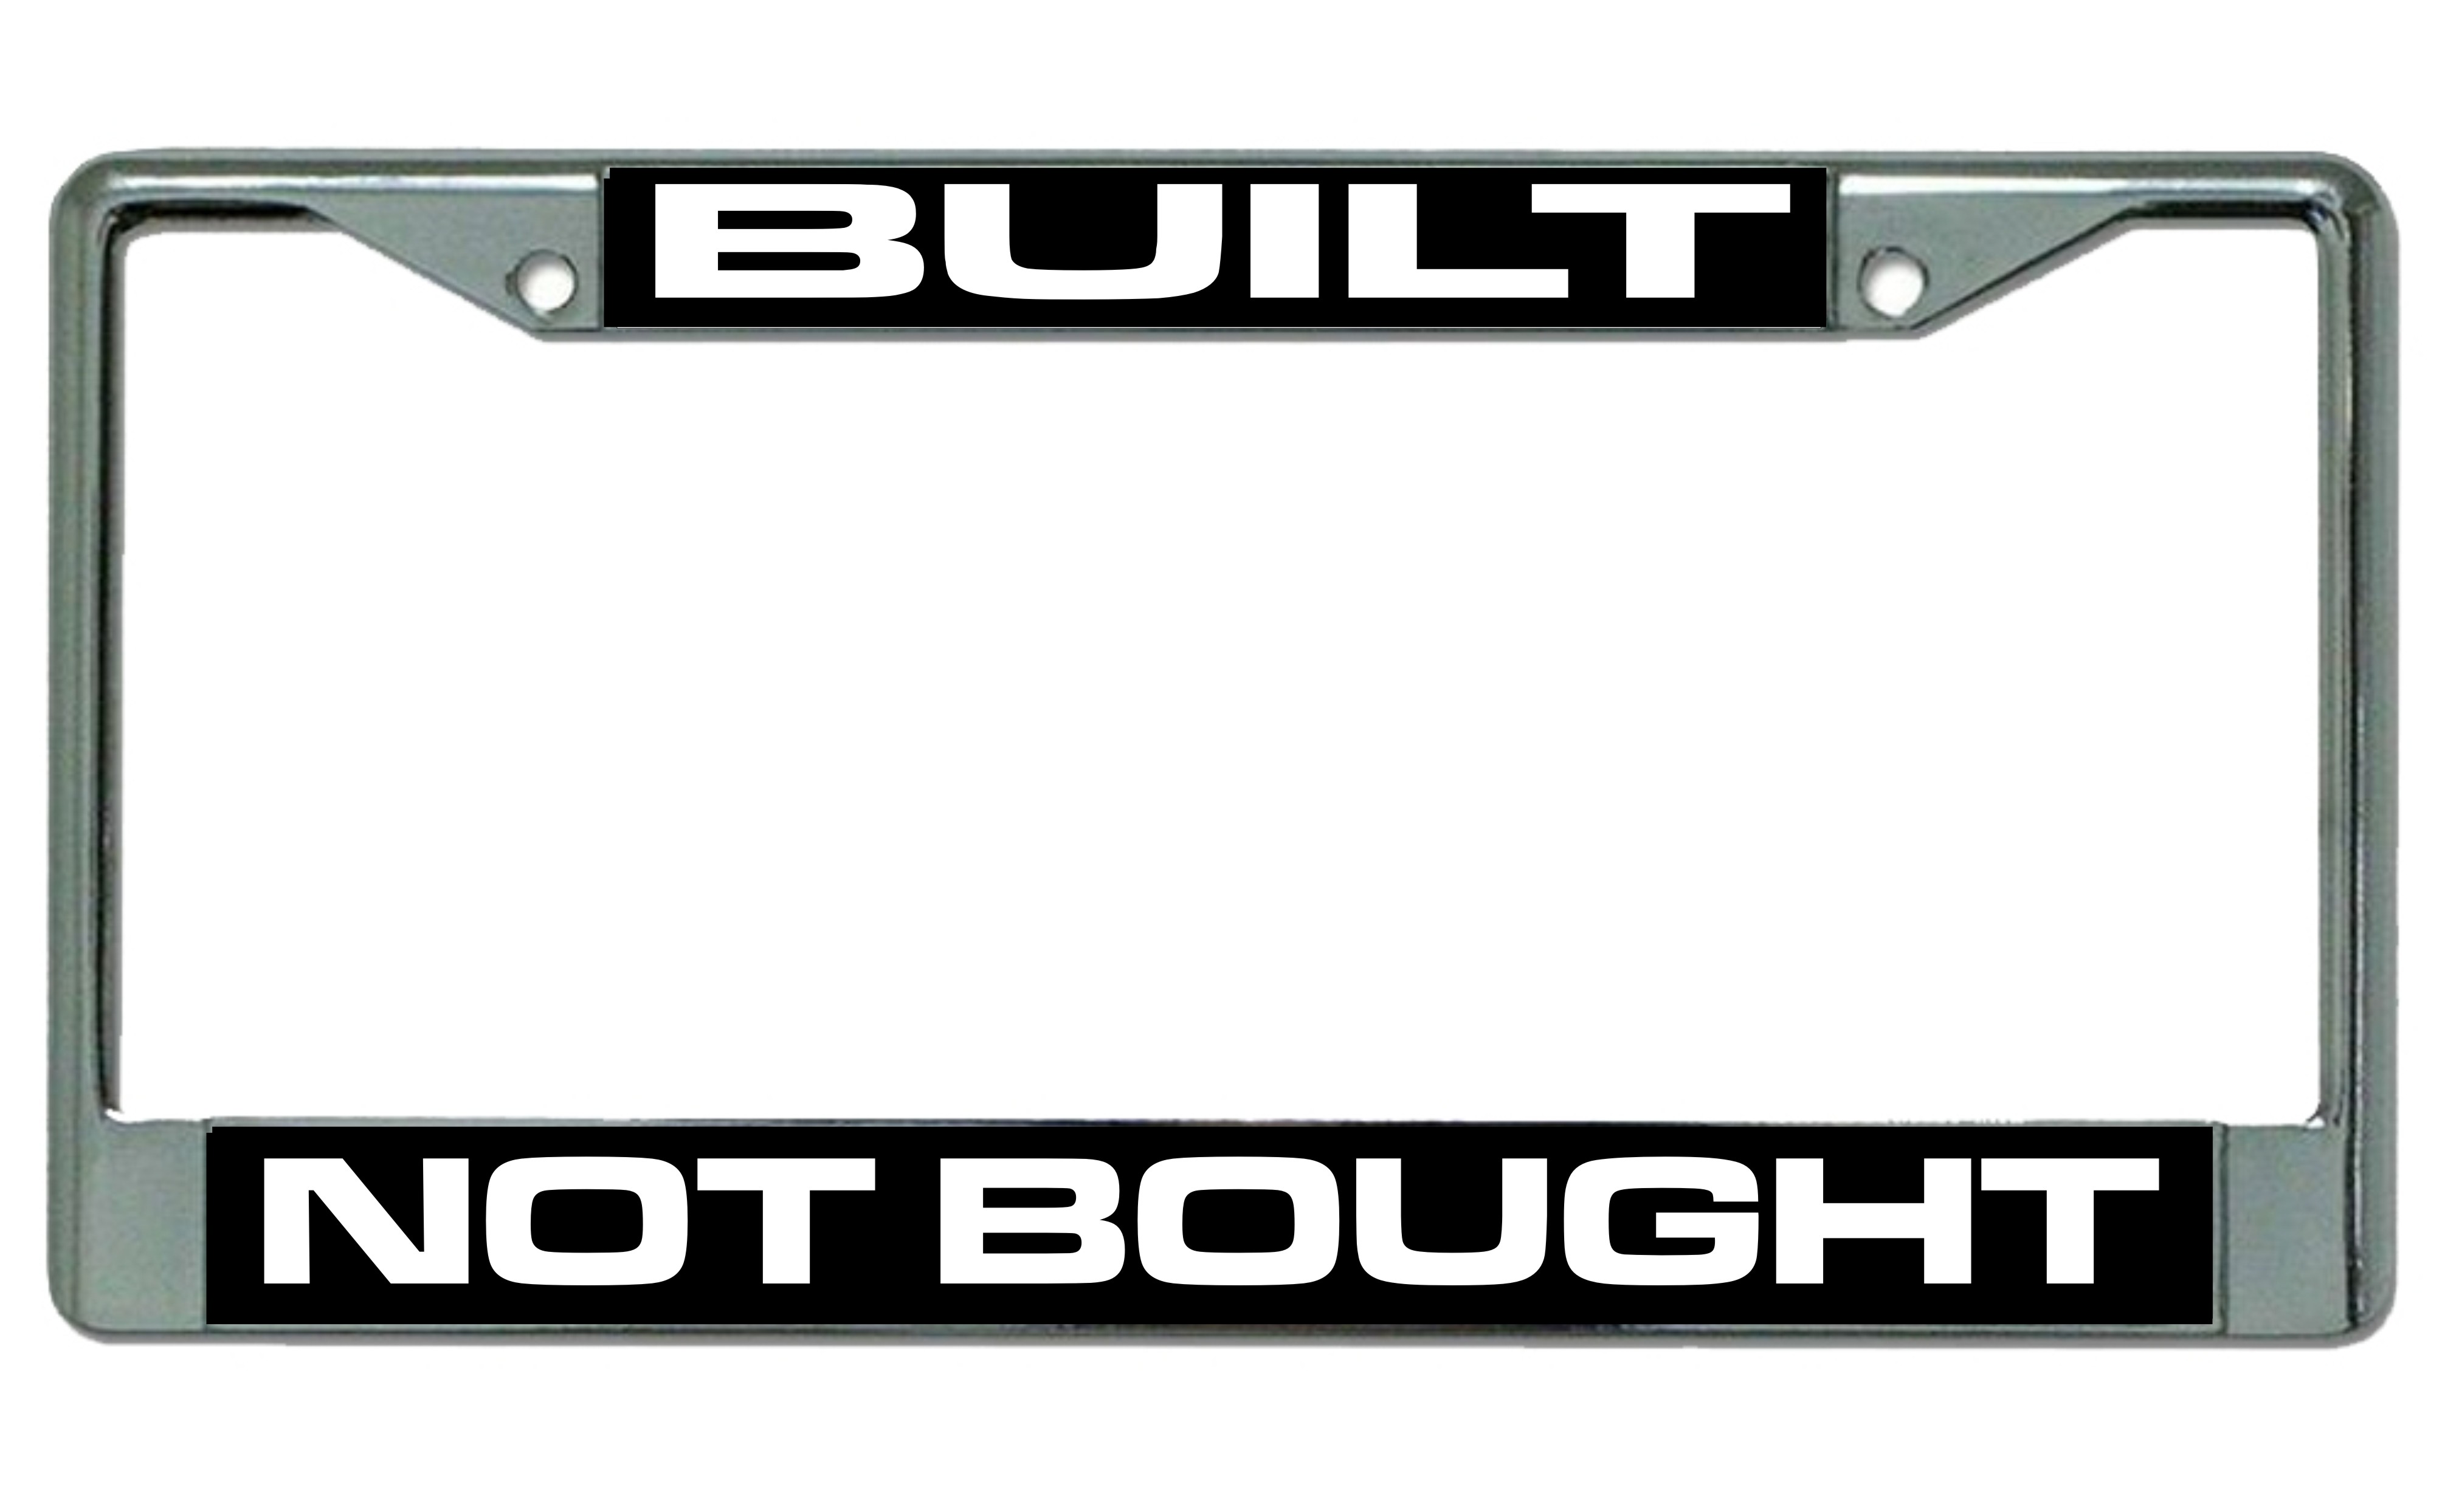 Built Not Bought Photo License Plate Frame  Free SCREW Caps with this Frame